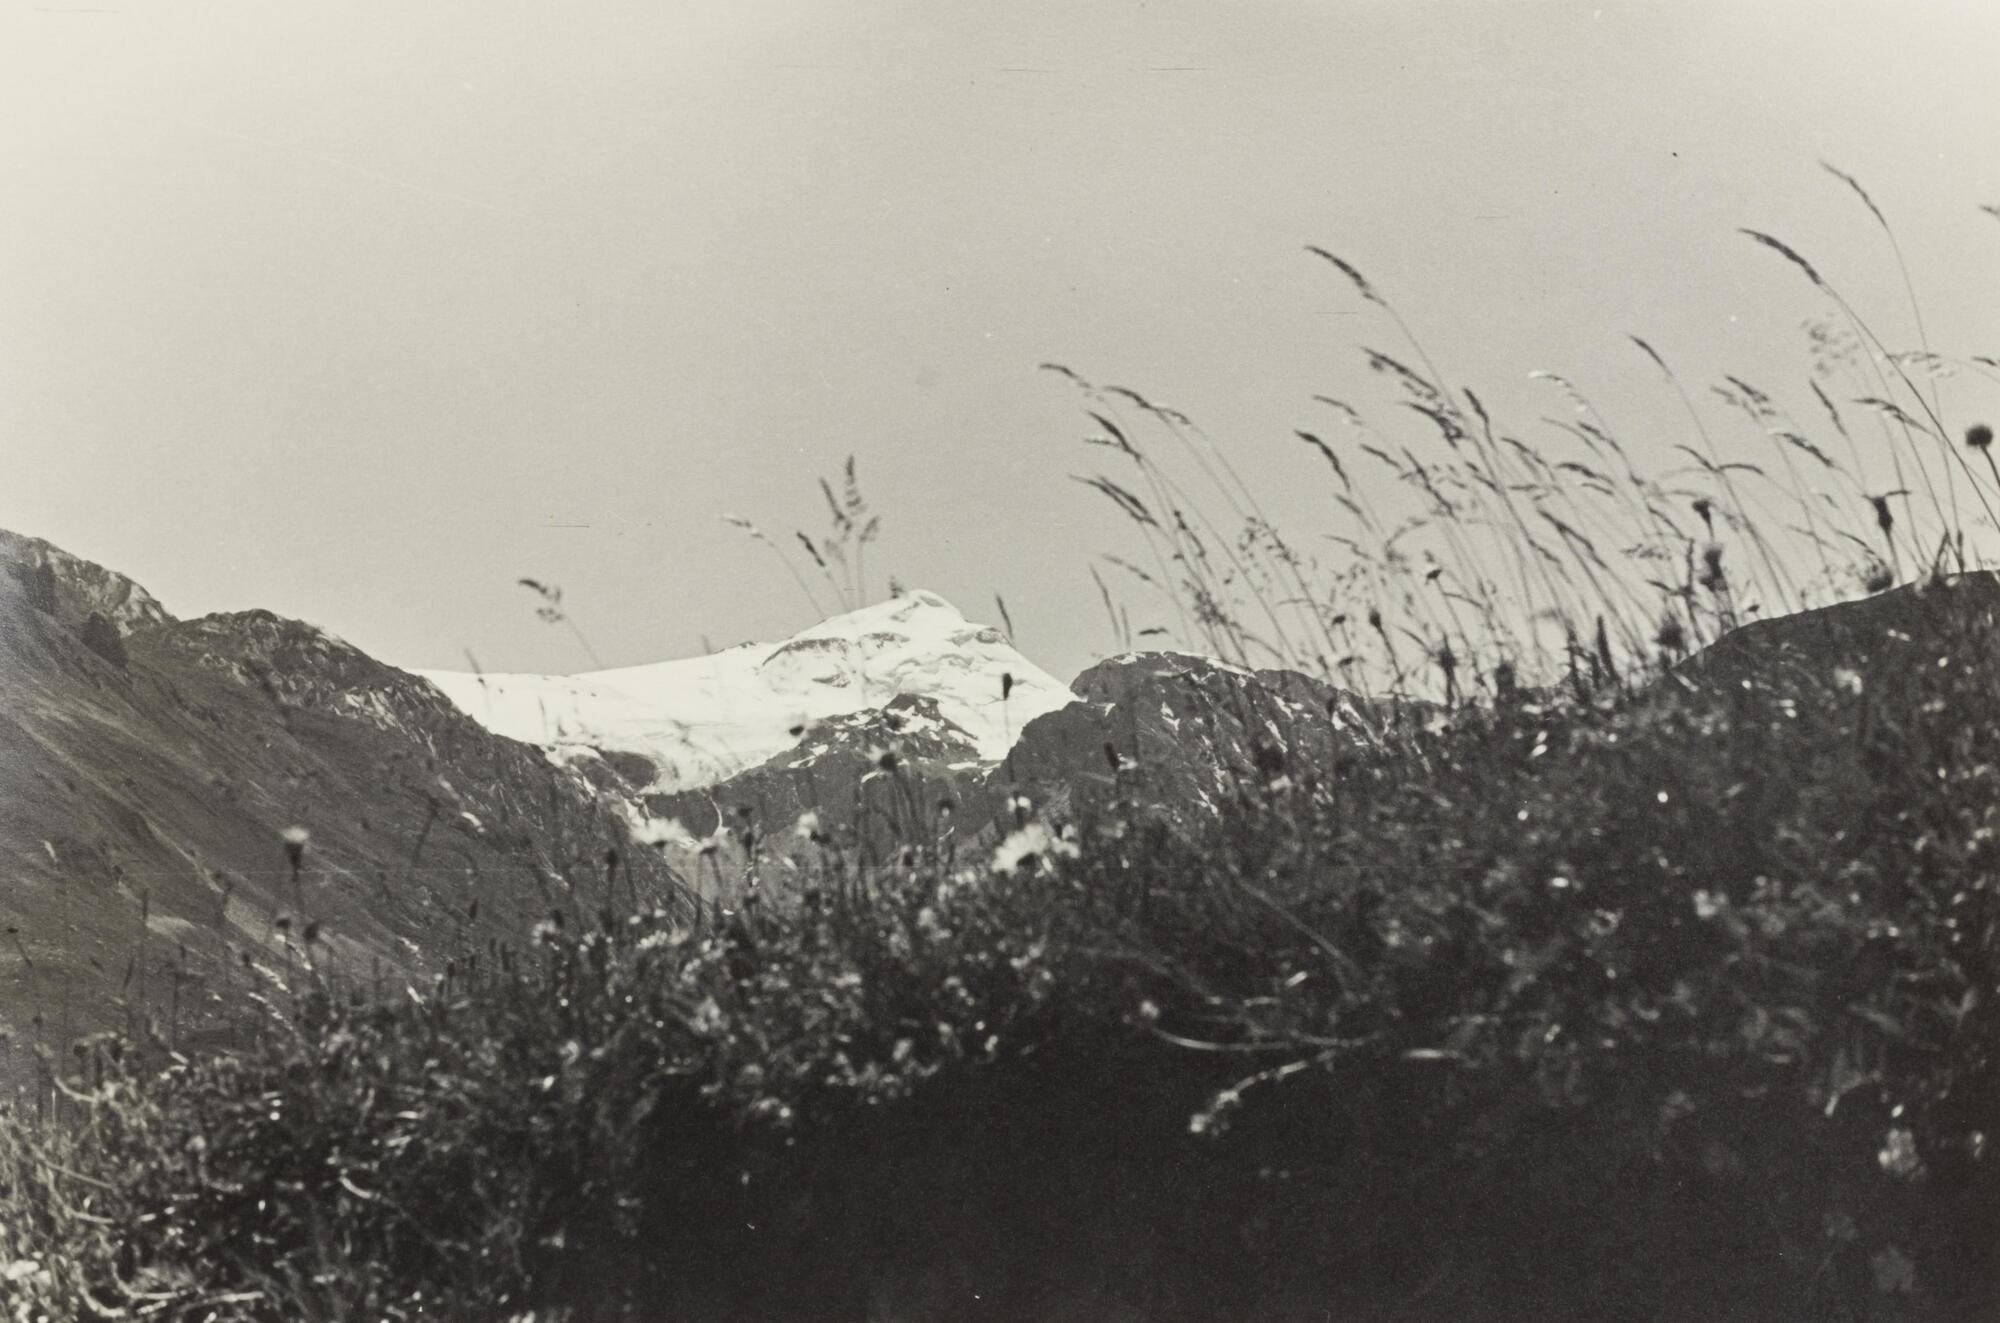 View of fields with plants in the foreground and a snow-topped mountain behind them.